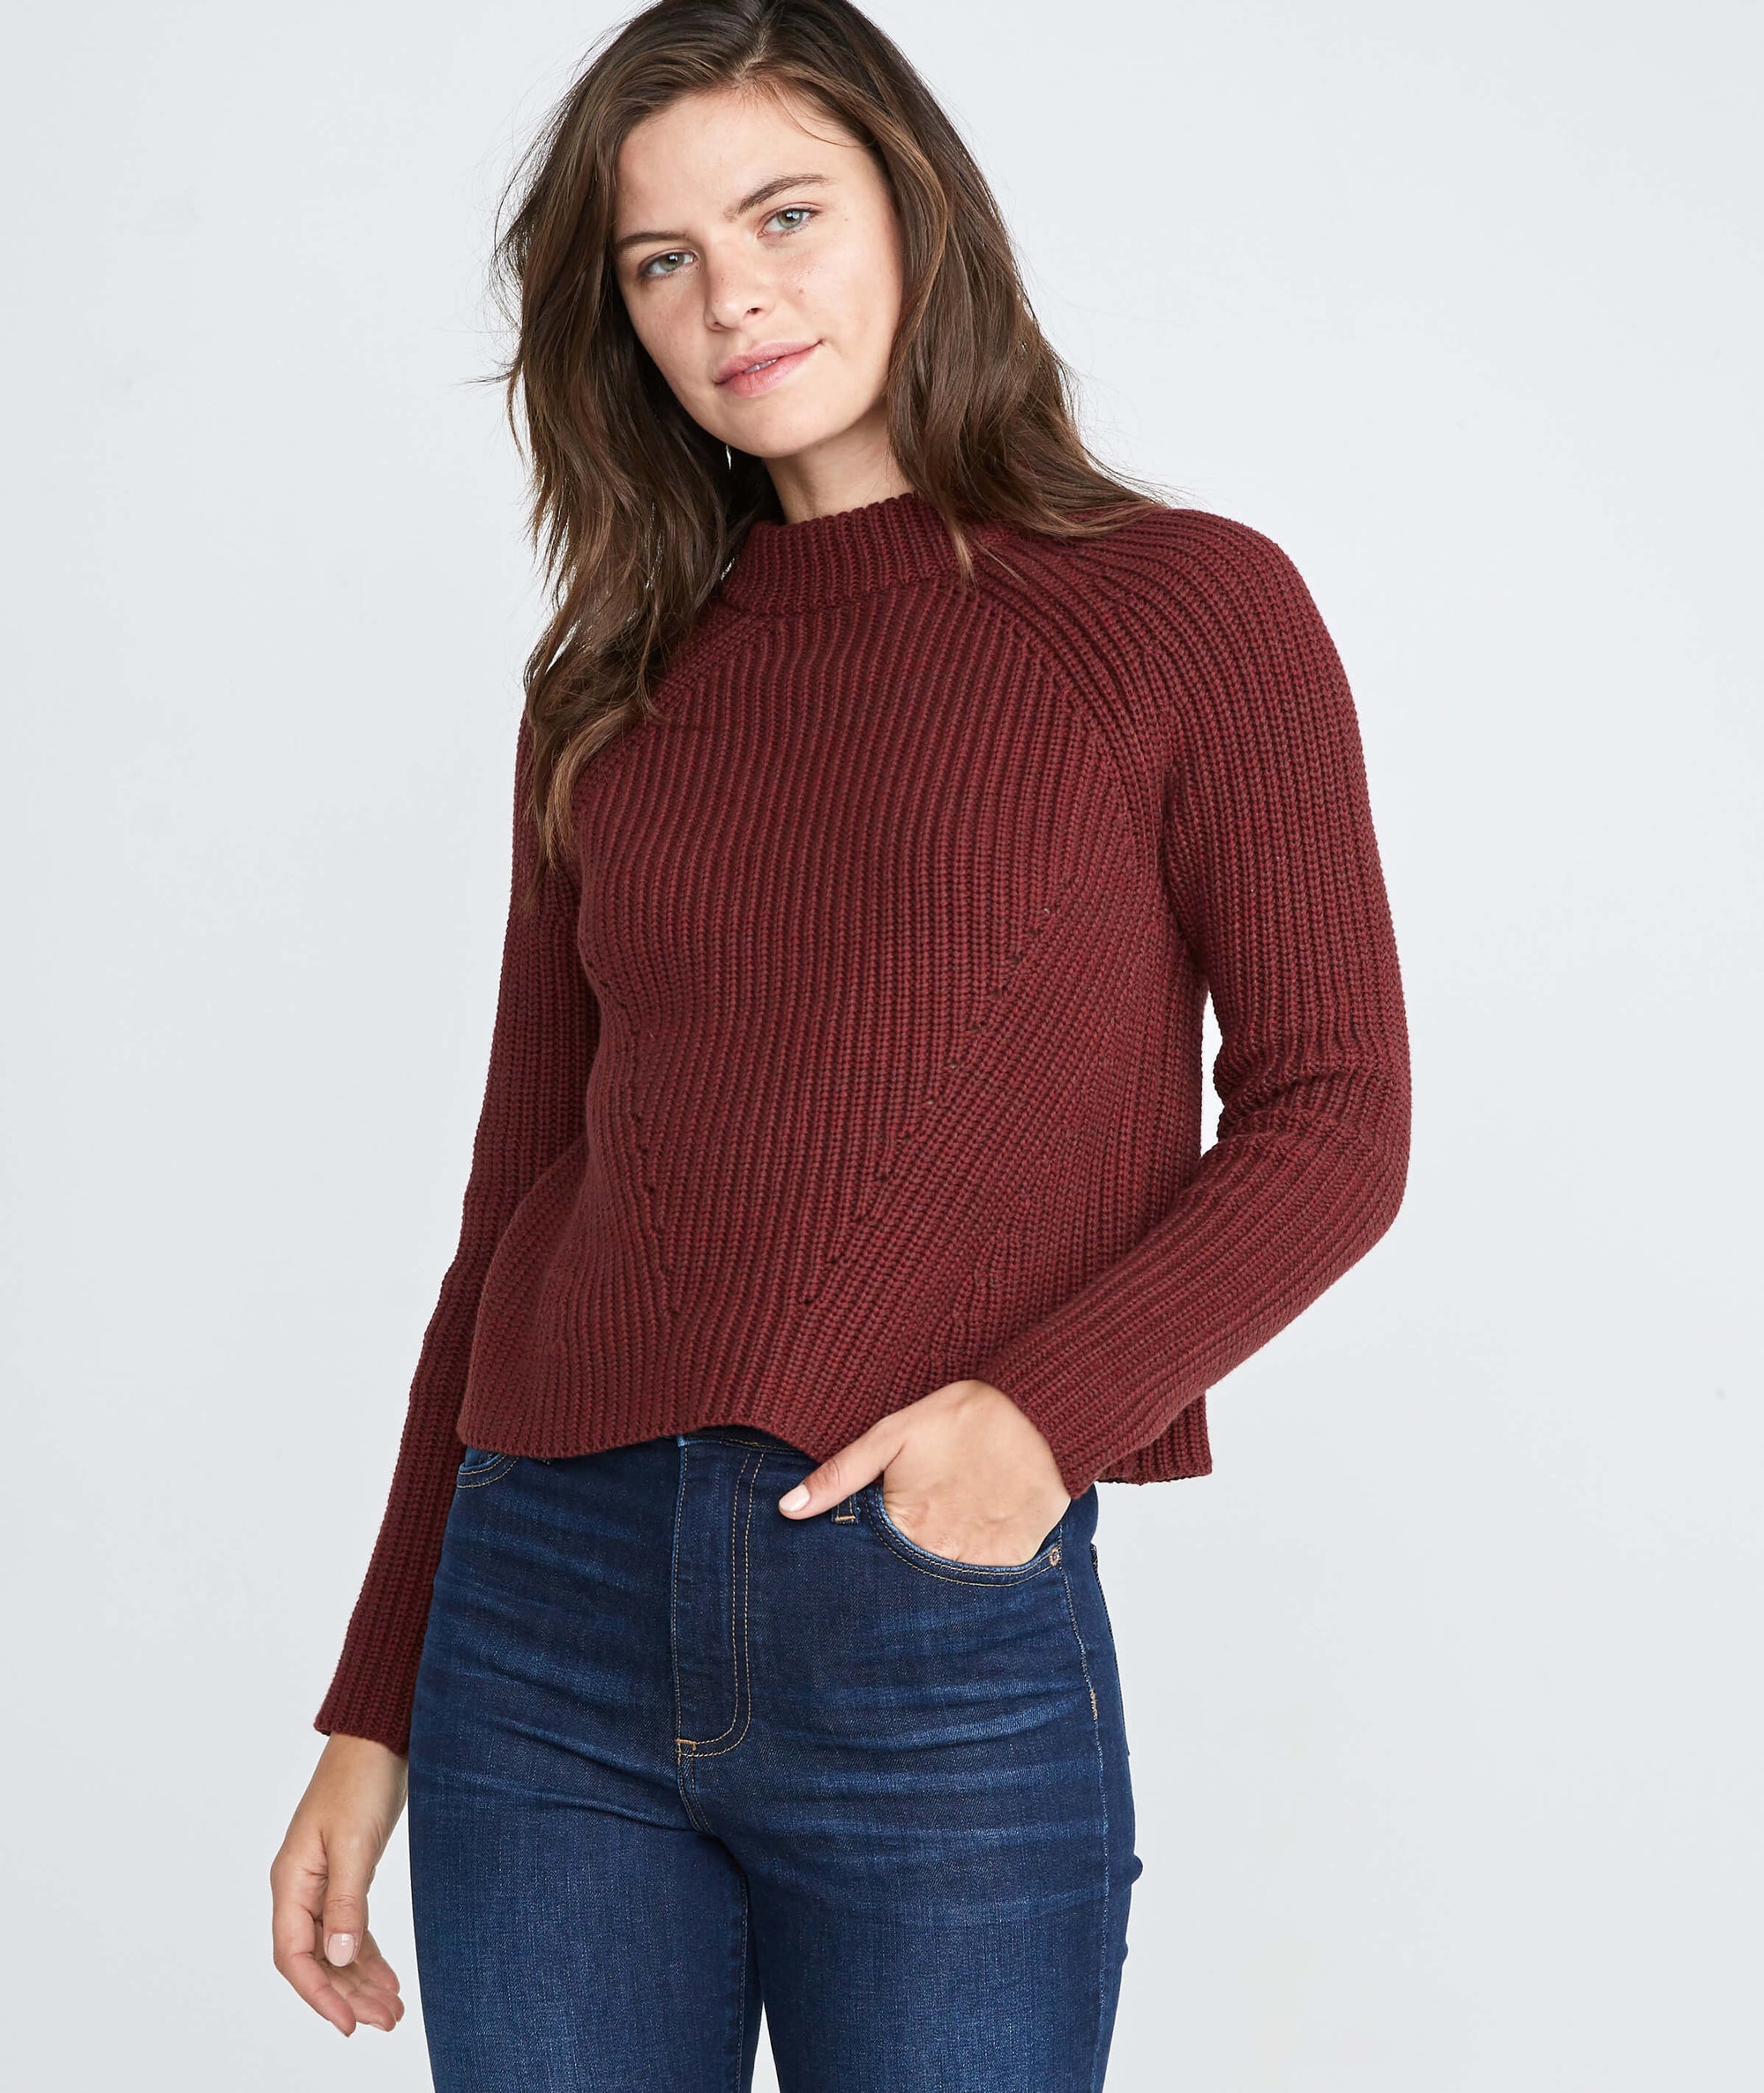 Cleo Mock Neck Sweater in Rosewood – Marine Layer